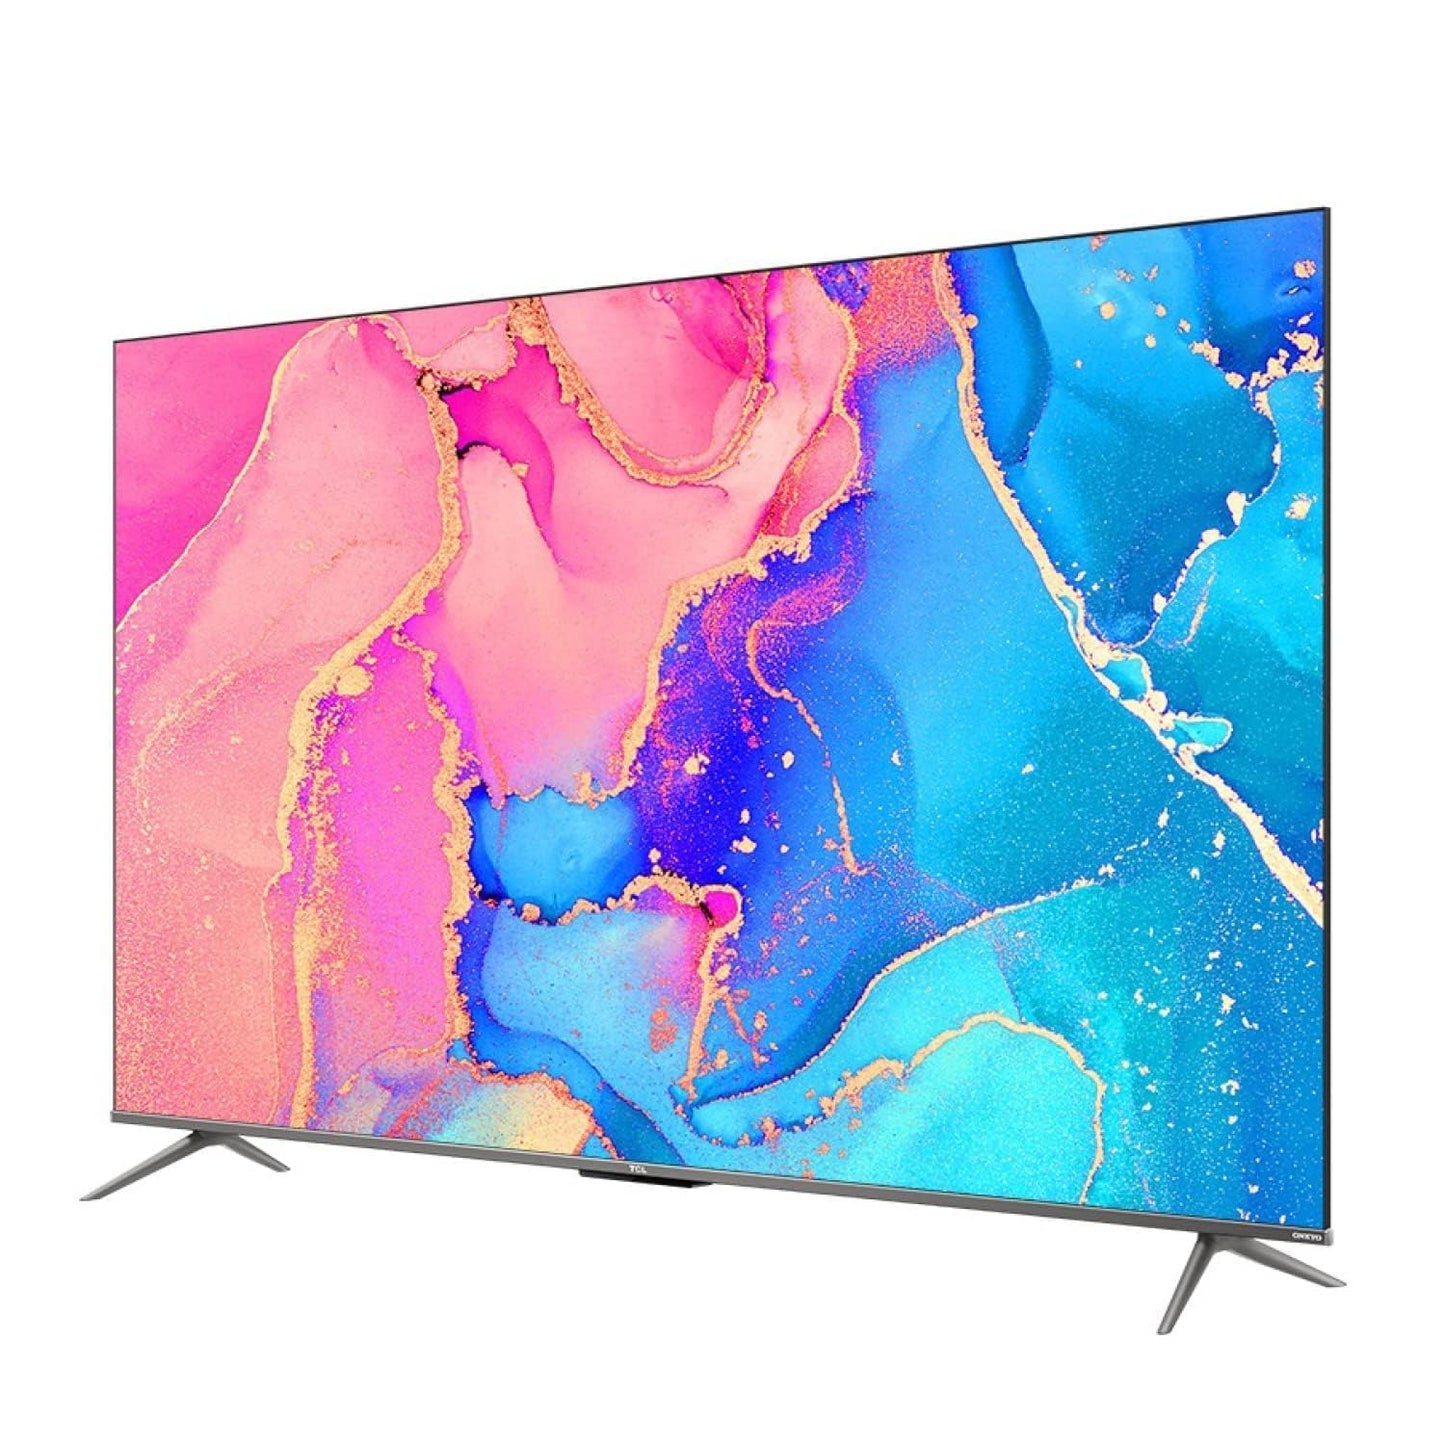 TCL 50 Inch 4K Ultra HD QLED Smart TV, Google TV with Hands-free Voice Control, Dolby Vision IQ-Atmos, HDR 10+, Game Master, Wide Colour Gamut, Onkyo Audio, Quantum Dot Technology, 50C635 (2022 Model)